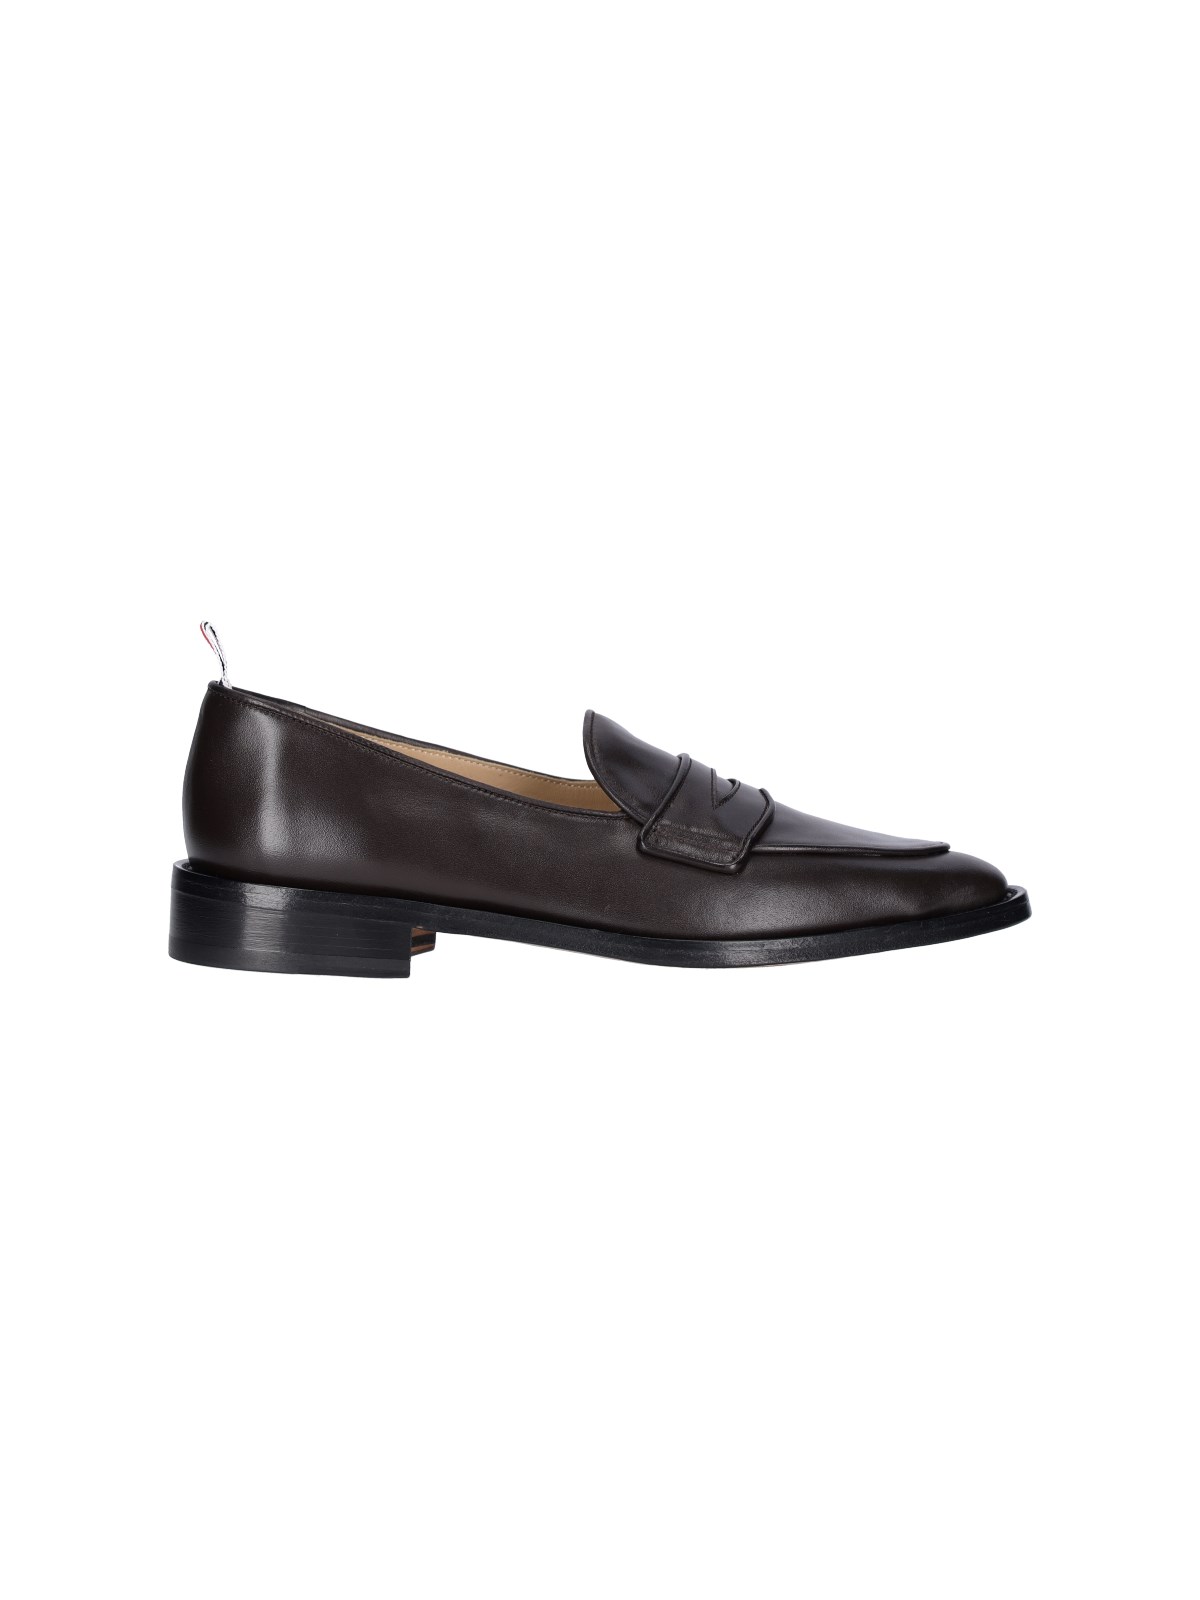 Thom Browne 'varsity Penny' Loafers In Marrone